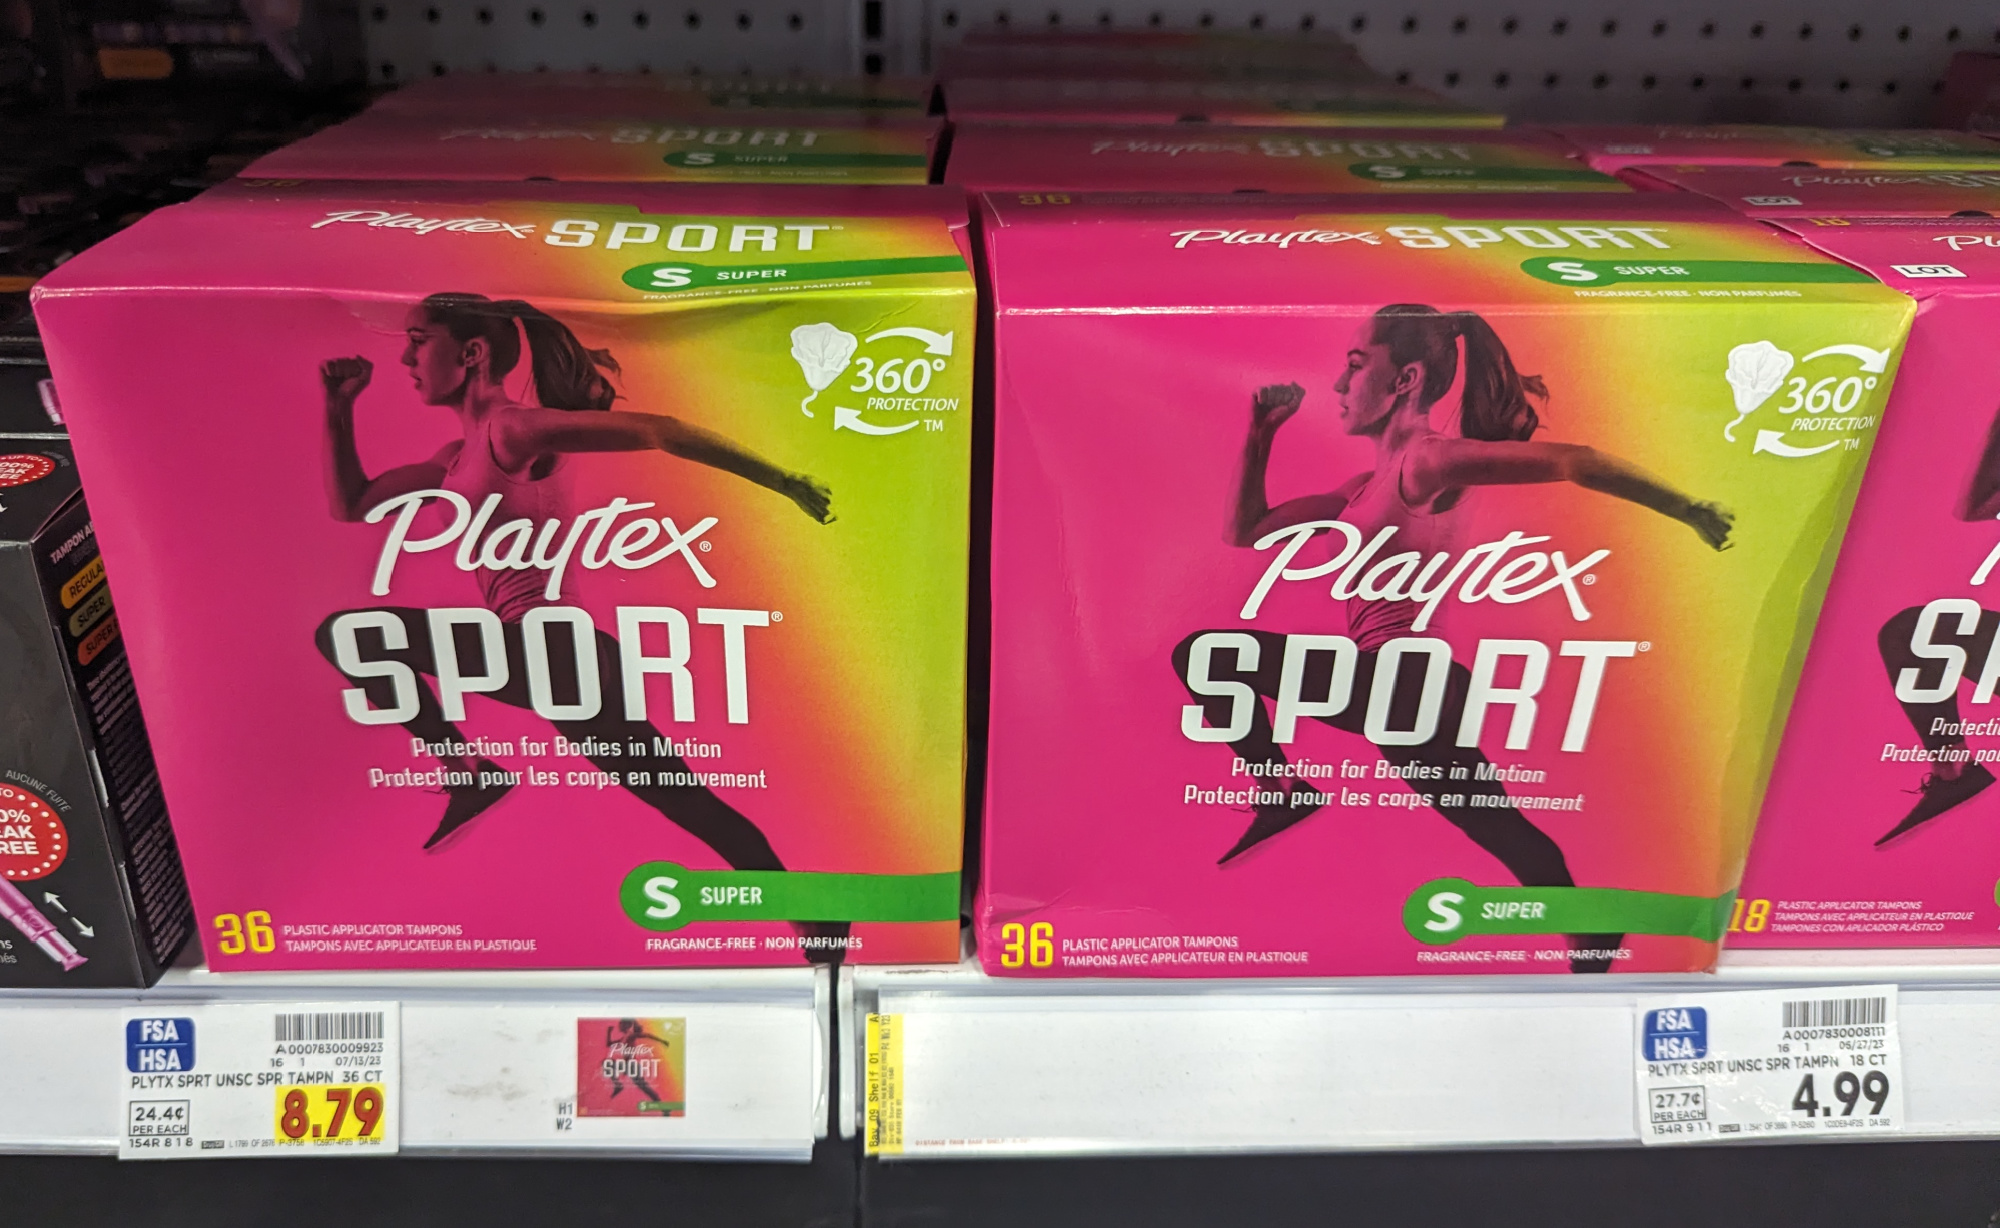 Playtex Sport Tampons Coupon To Print – Save $4 - iHeartKroger